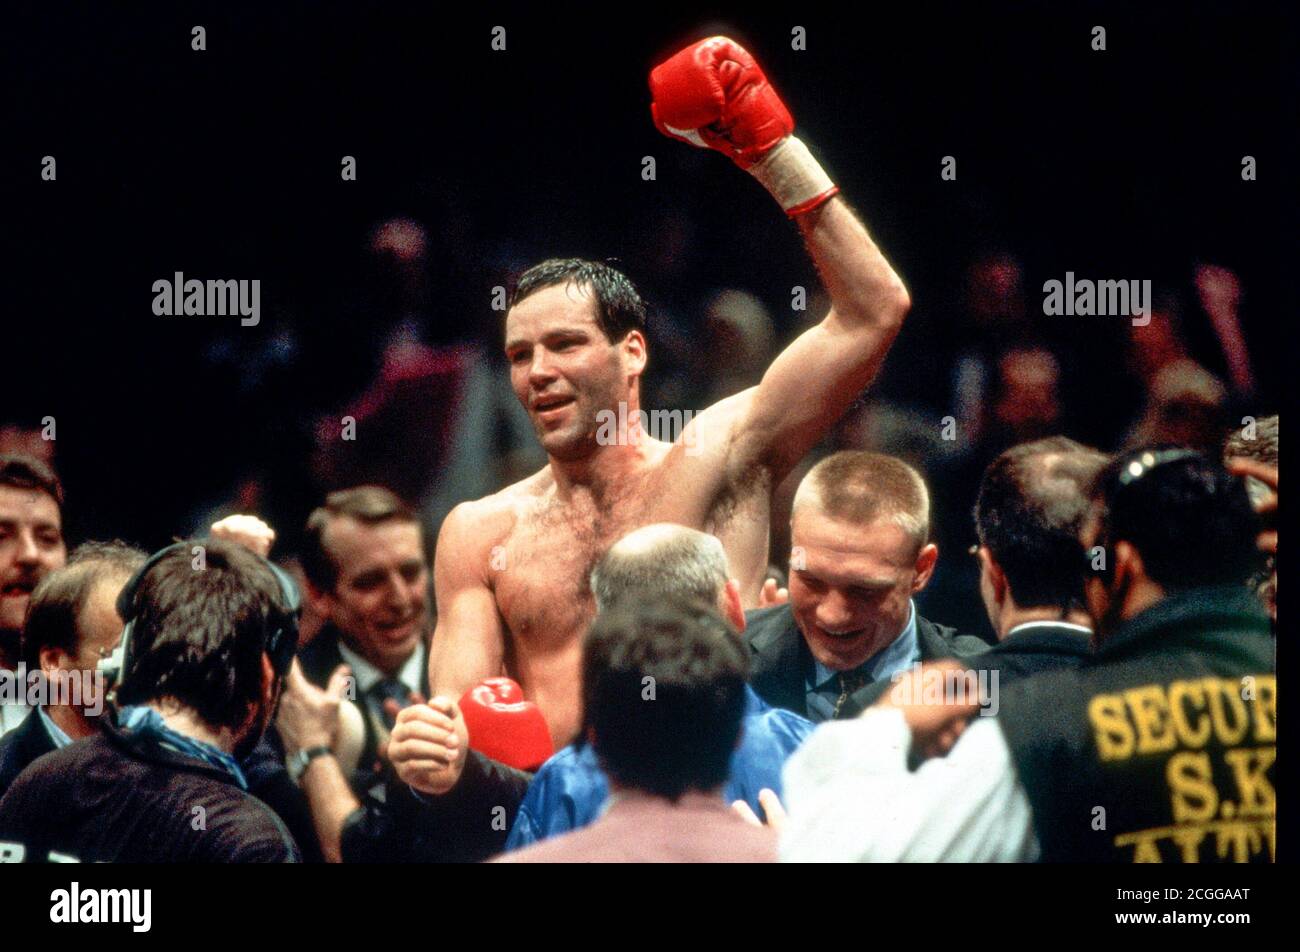 Boxer Henry Maske celebrates after his win against Marcus EGERTON in Festhalle Frankfurt, Germany on February 11th 1995 Stock Photo